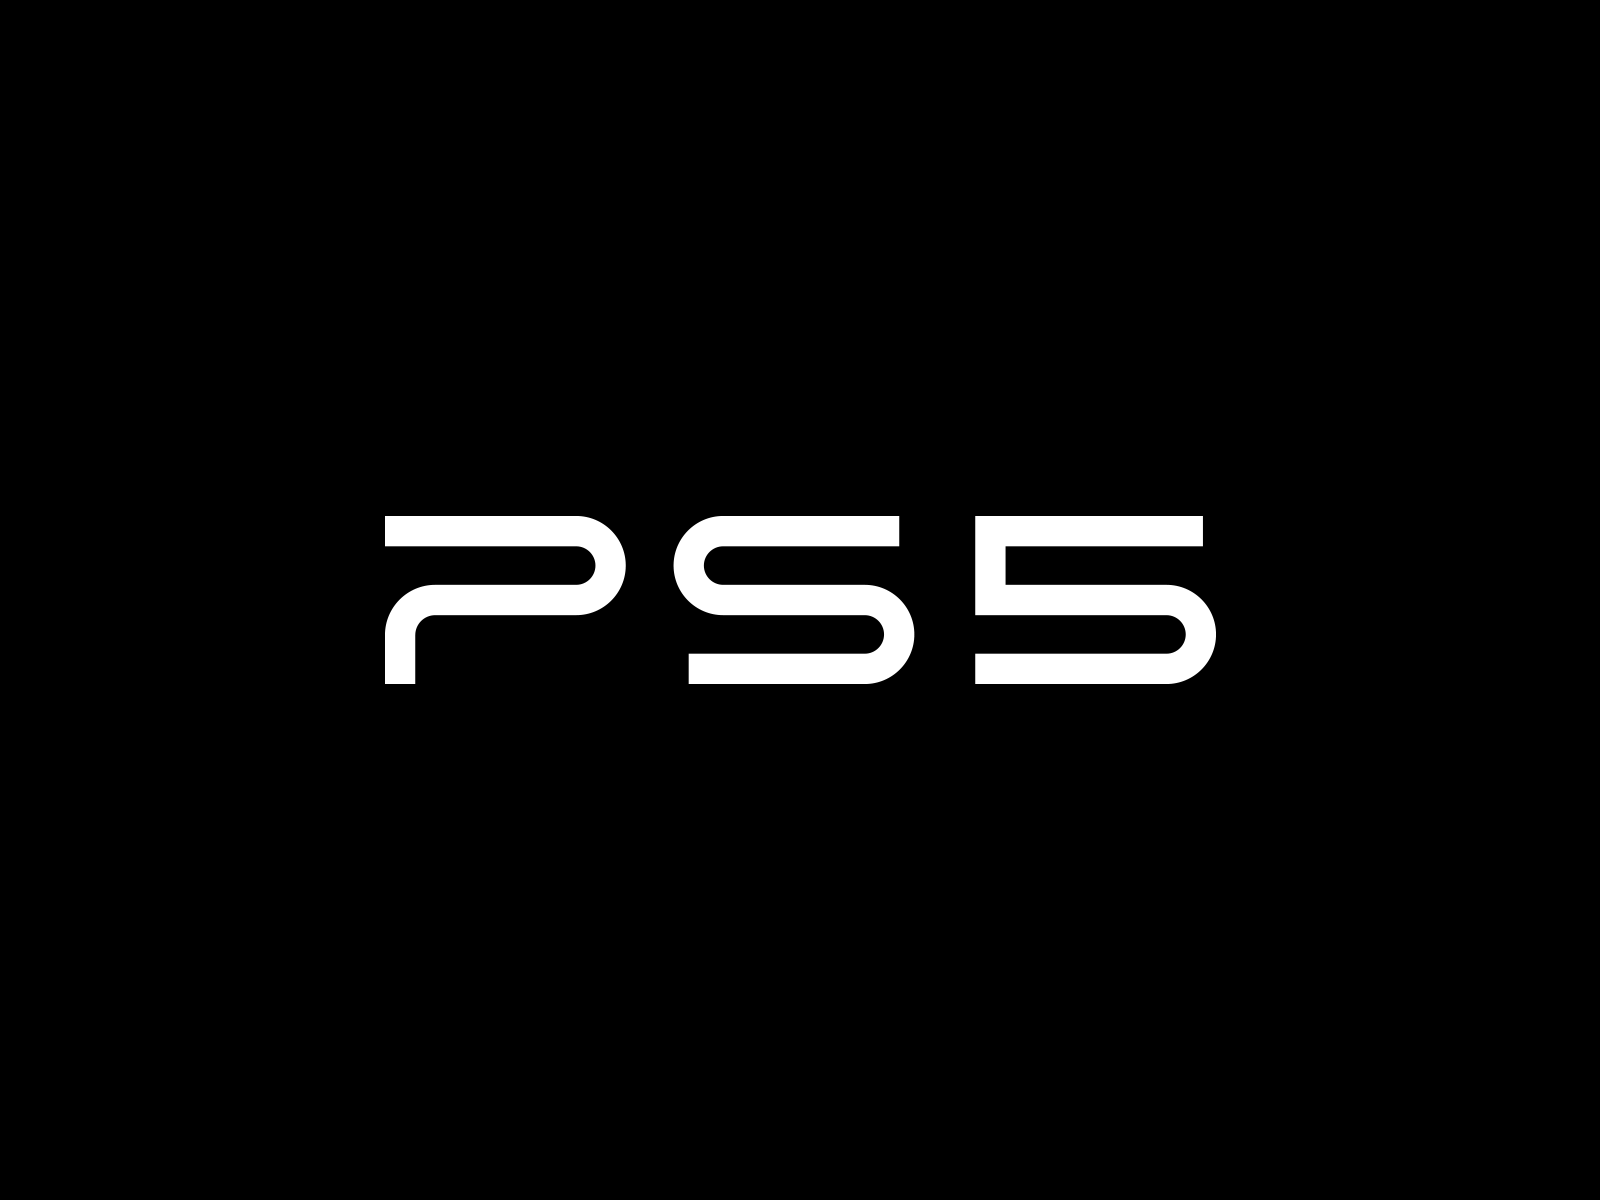 PS5 Logo by Leo on Dribbble